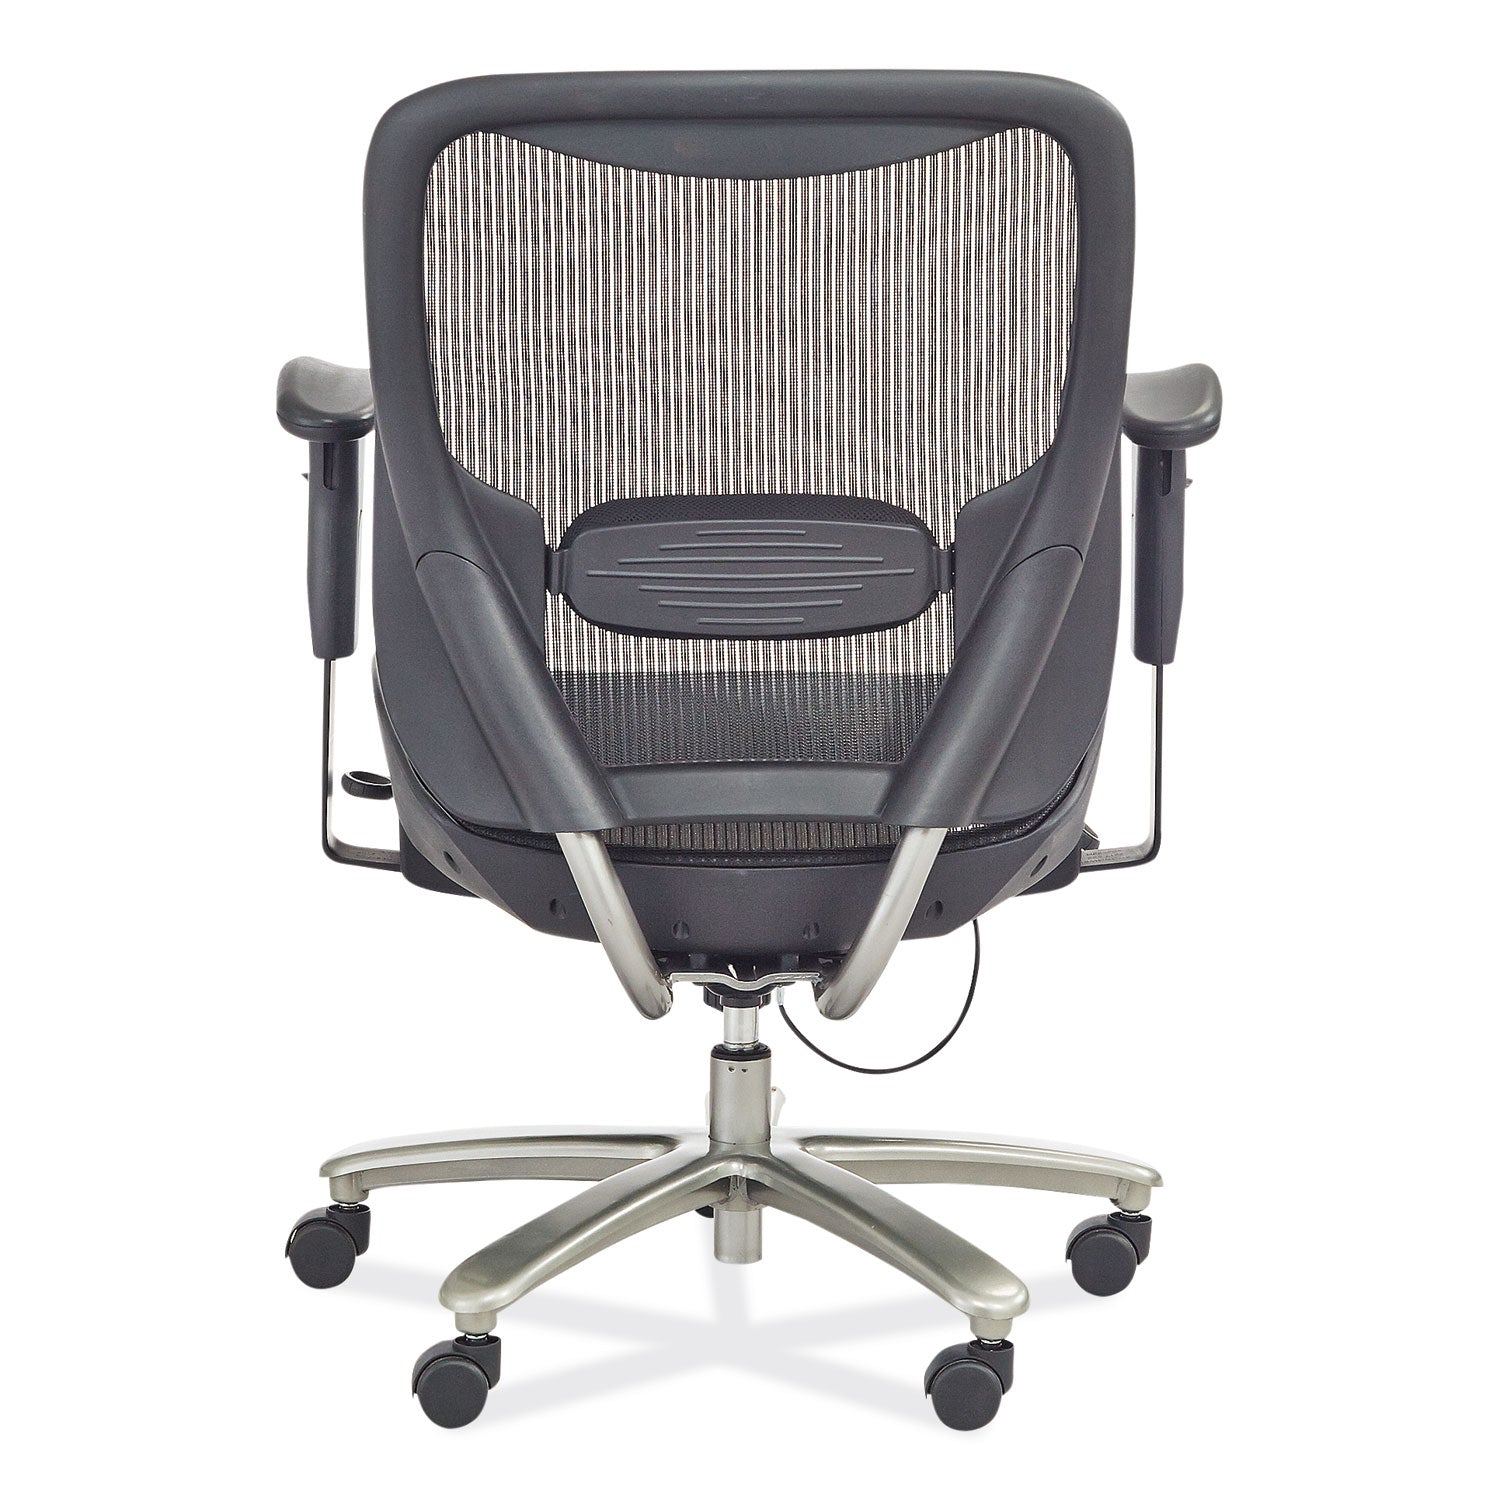 lineage-big-&-tall-all-mesh-task-chair-supports-400lb-195--2325-high-black-seatchrome-baseships-in-1-3-business-days_saf3505bl - 6